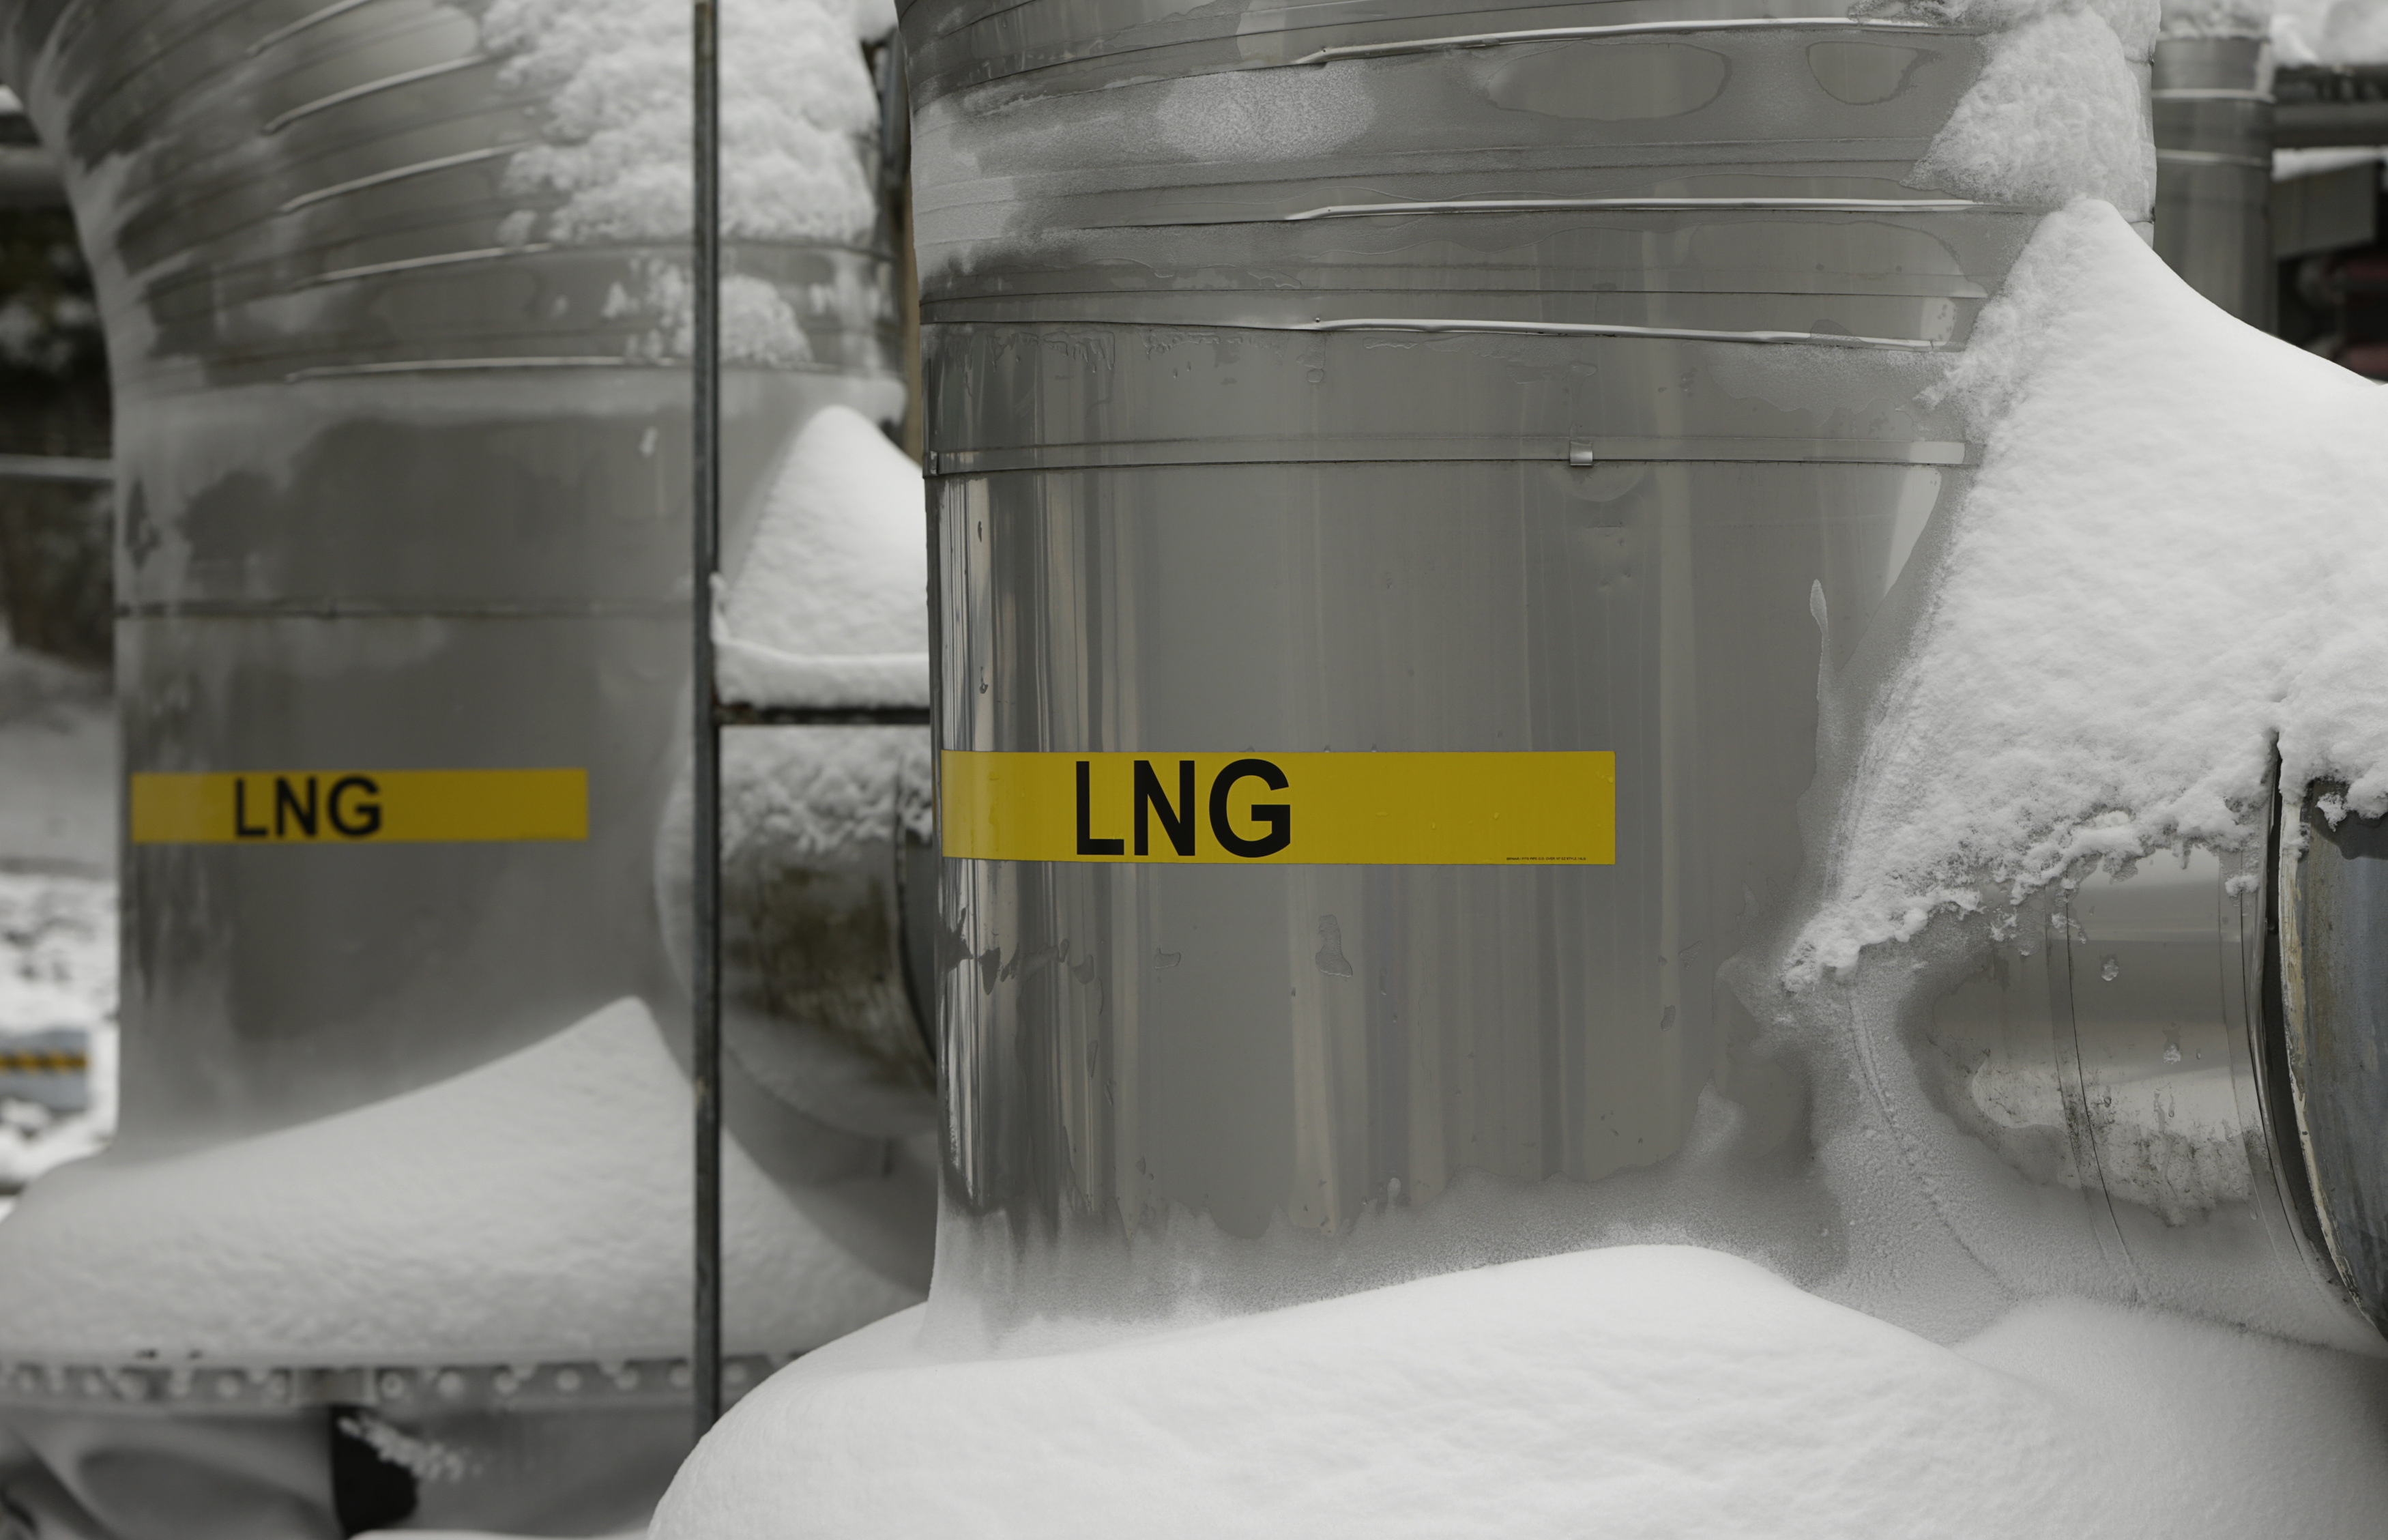 Snow covered transfer lines are seen at the Dominion Cove Point Liquefied Natural Gas terminal in Maryland